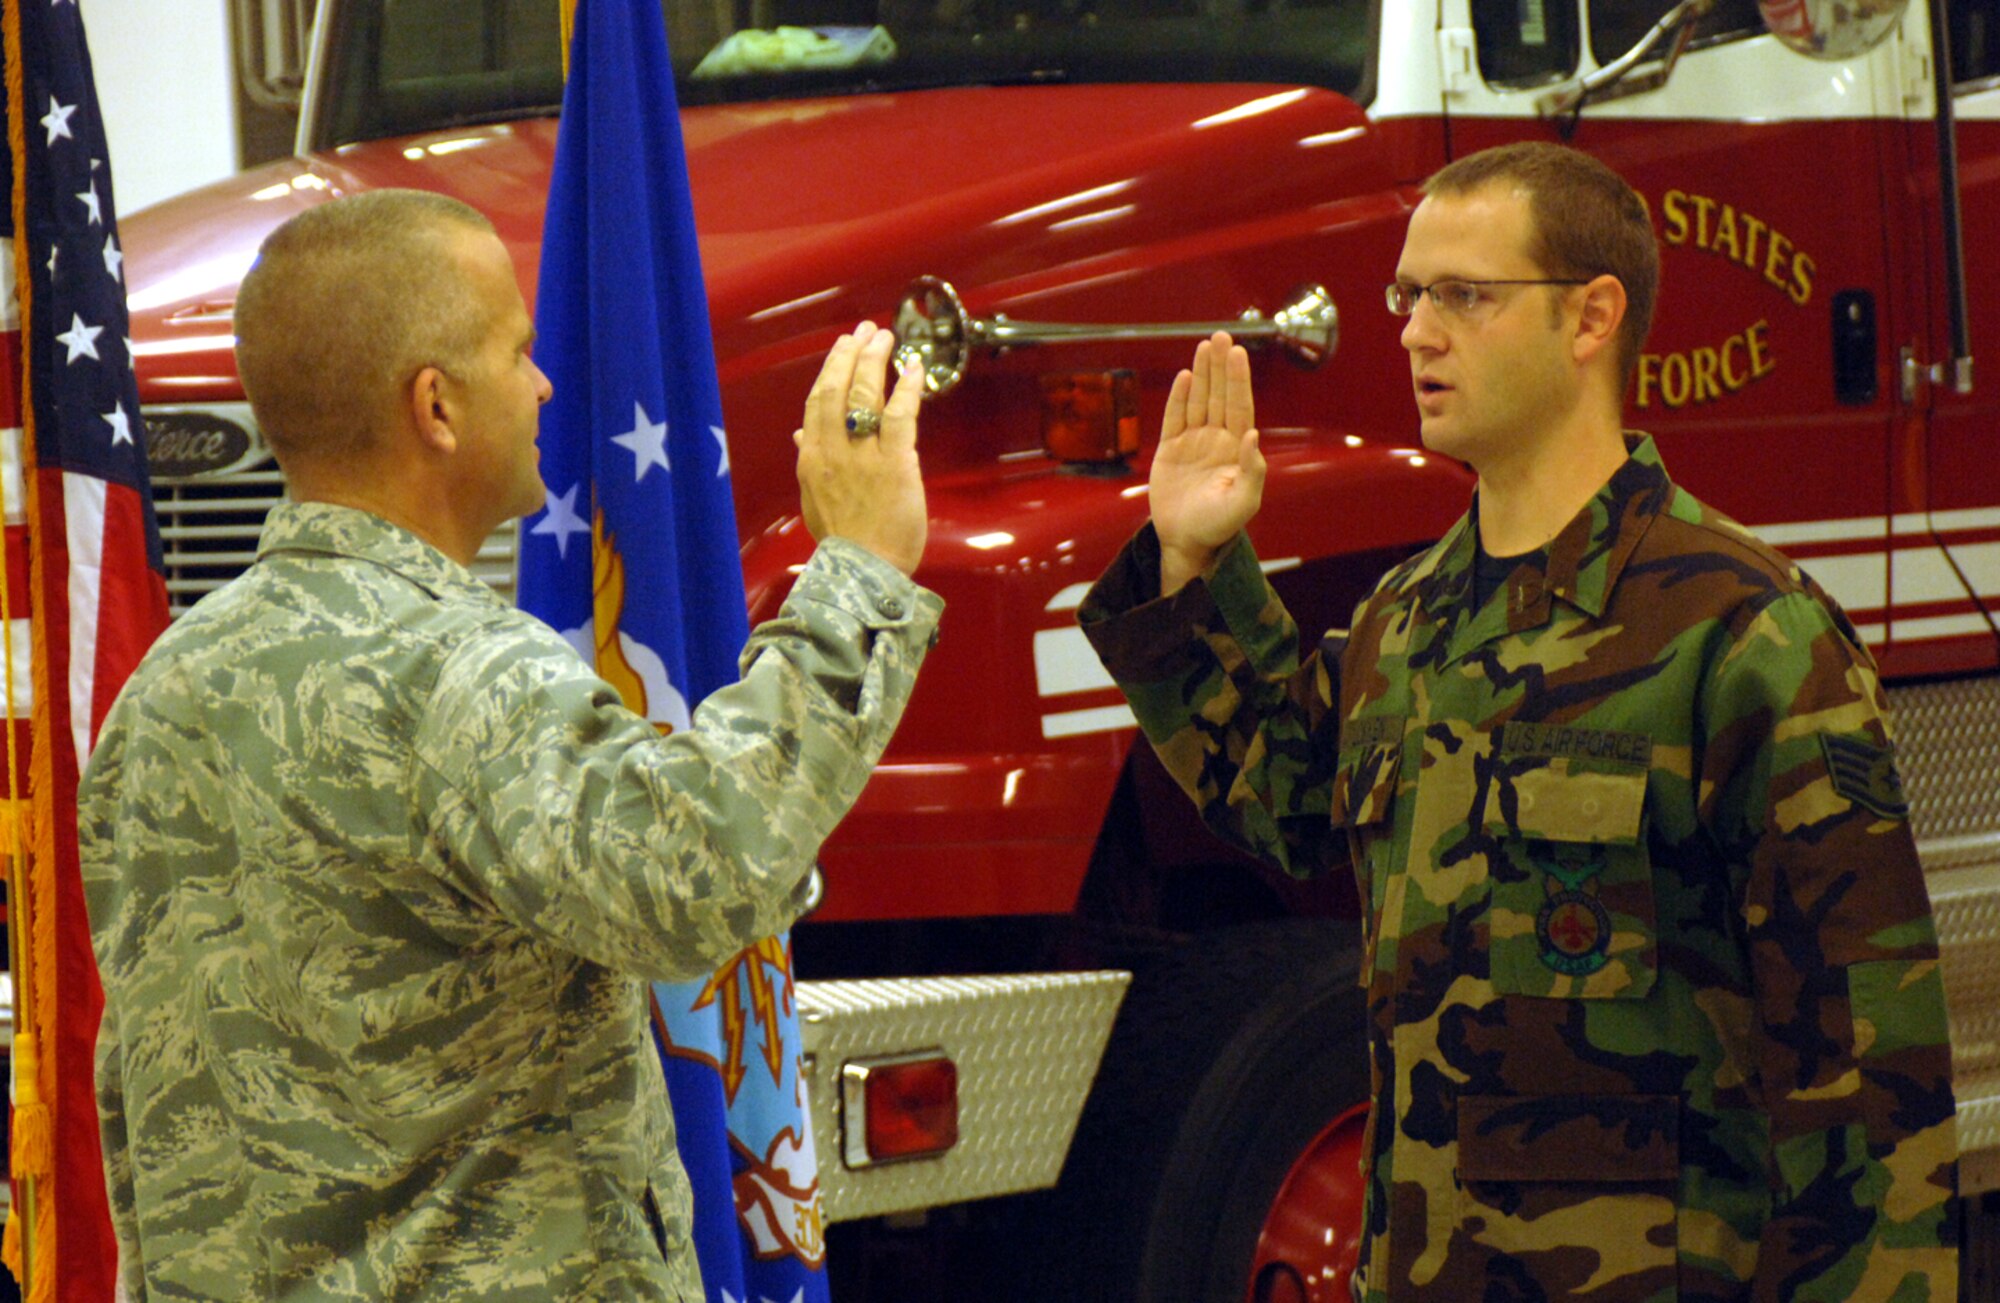 Staff Sgt. David Lokken, 14th Civil Engineer Squadron, takes the Oath of Enlistment from Lt. Col. Peter Ridilla, 14th CES commander. Sergeant Lokken reenlisted for an additional four years of service. (U.S. Air Force photo by Airman Josh Harbin) 